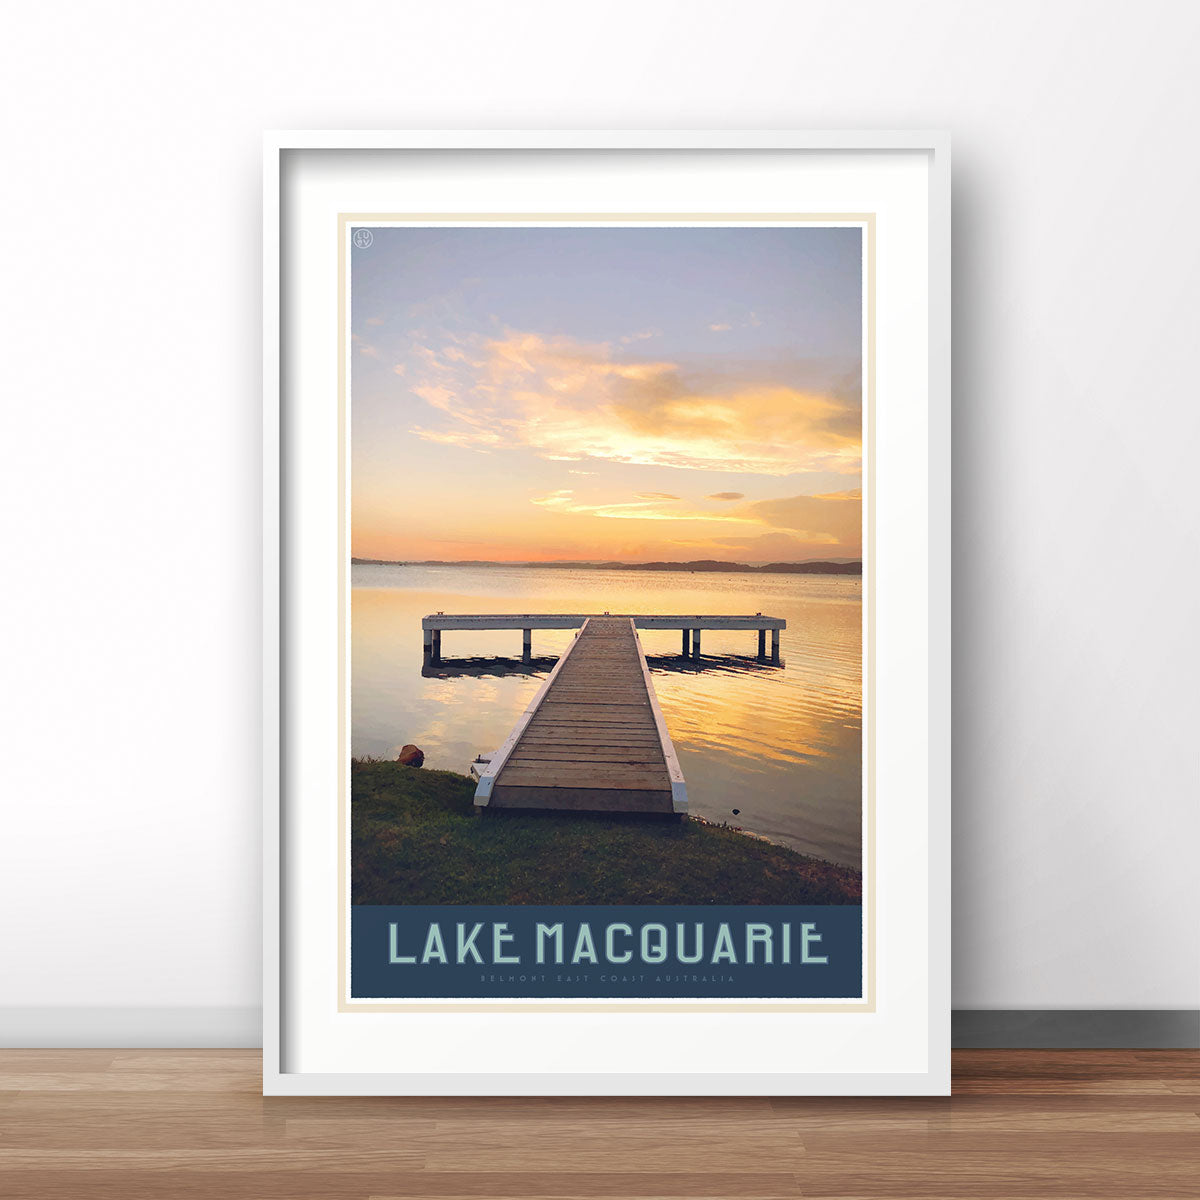 Lake Macquarie vintage travel style print by places we luv 